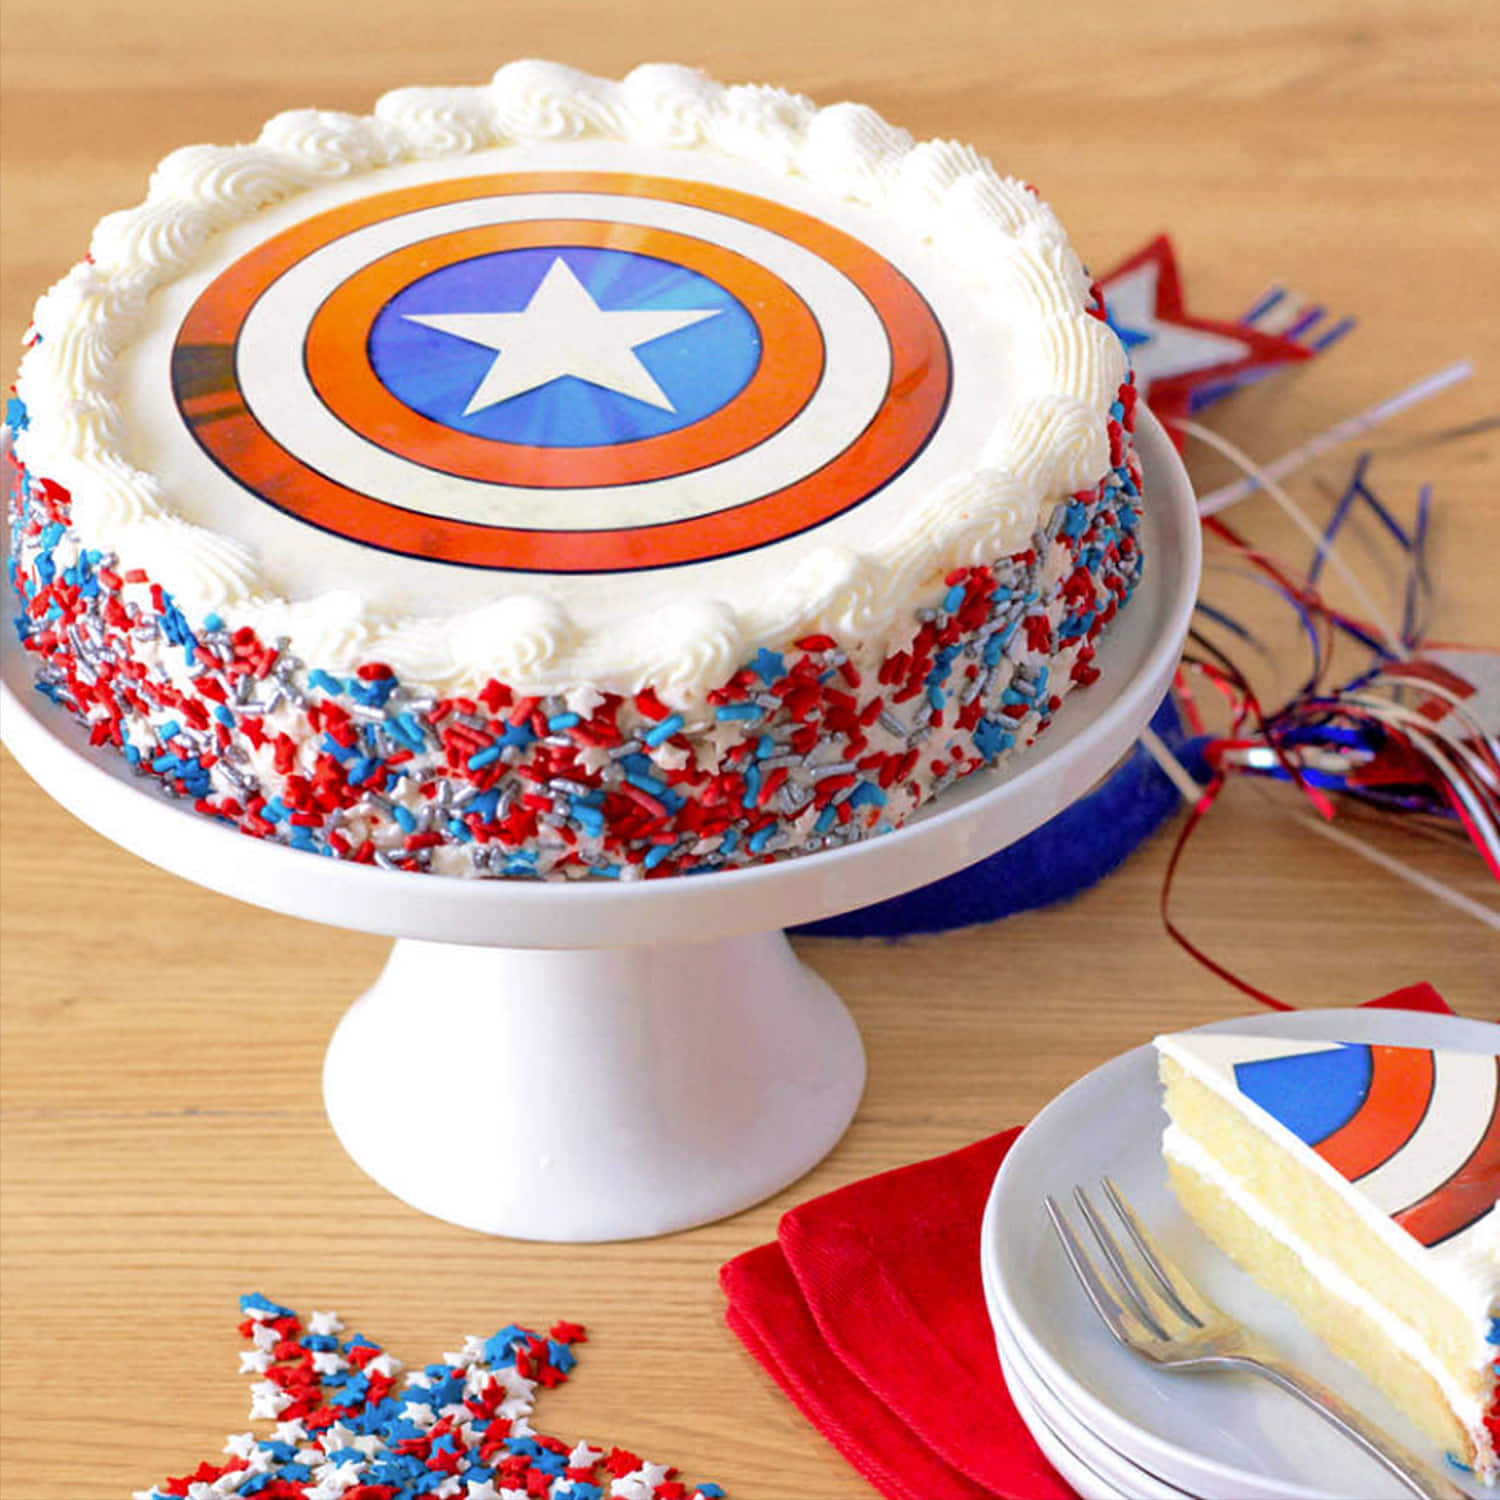 Charm's Cakes and Cupcakes - Baby Captain America Prices here  https://www.charmscakes.com/product/Captain_America/captain-america -customize-fondant-cake-caiden | Facebook